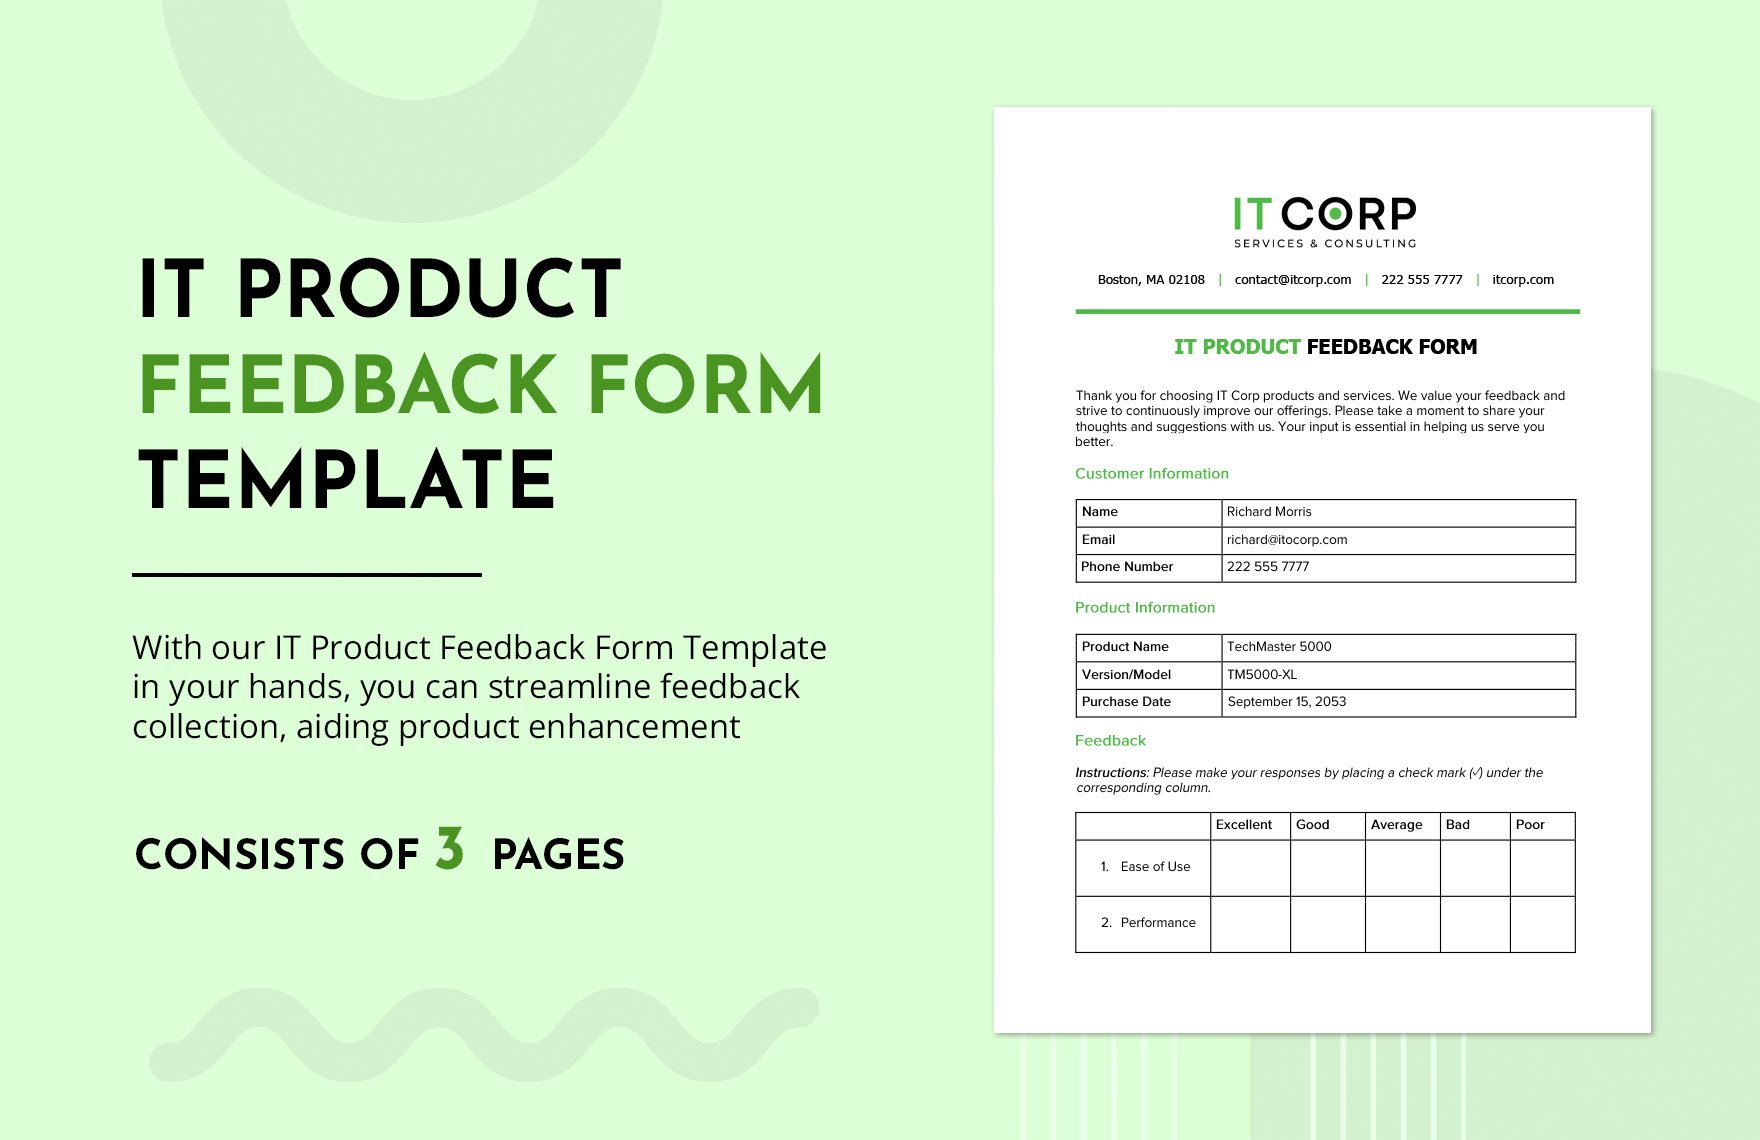 IT Product Feedback Form Template